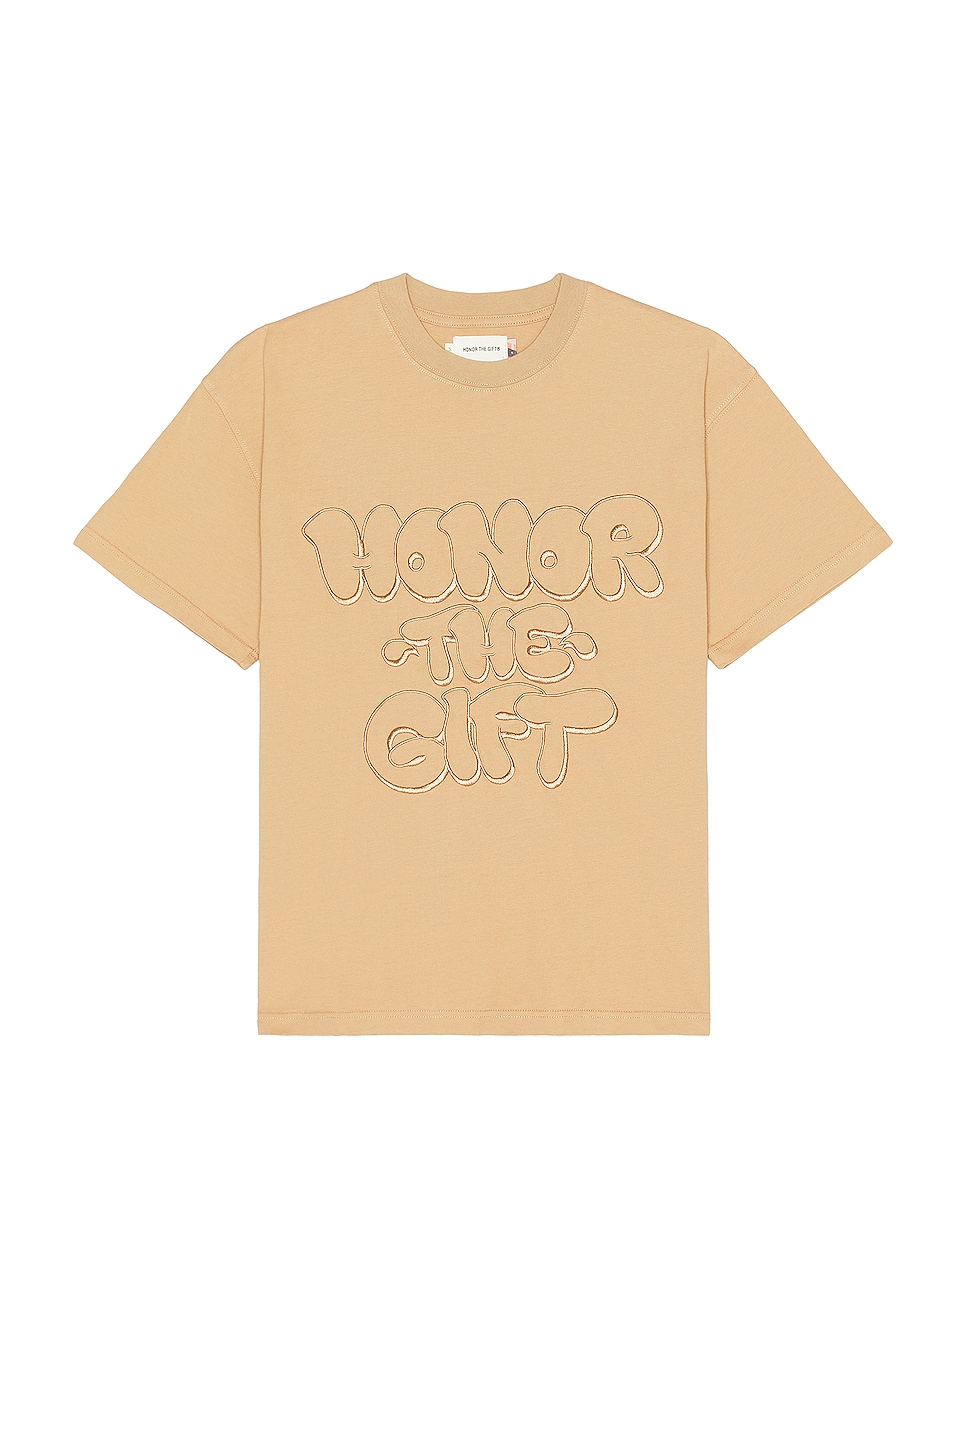 Amp'd Up Tee in Tan